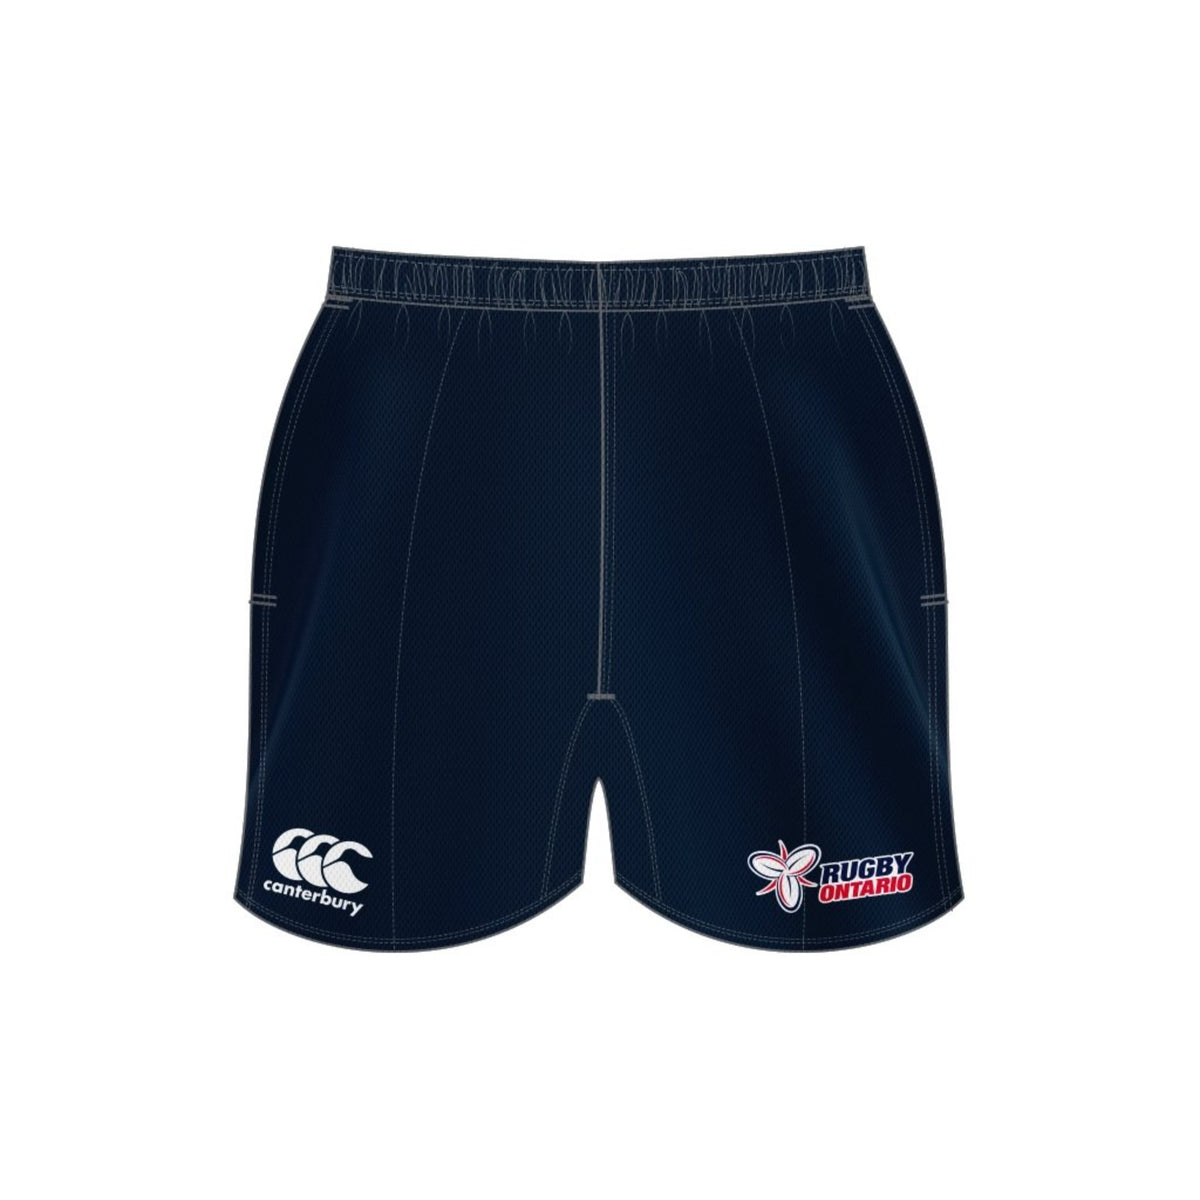 Rugby Ontario CCC Referee Shorts - www.therugbyshop.com www.therugbyshop.com TRS Distribution Canada SHORTS Rugby Ontario CCC Referee Shorts